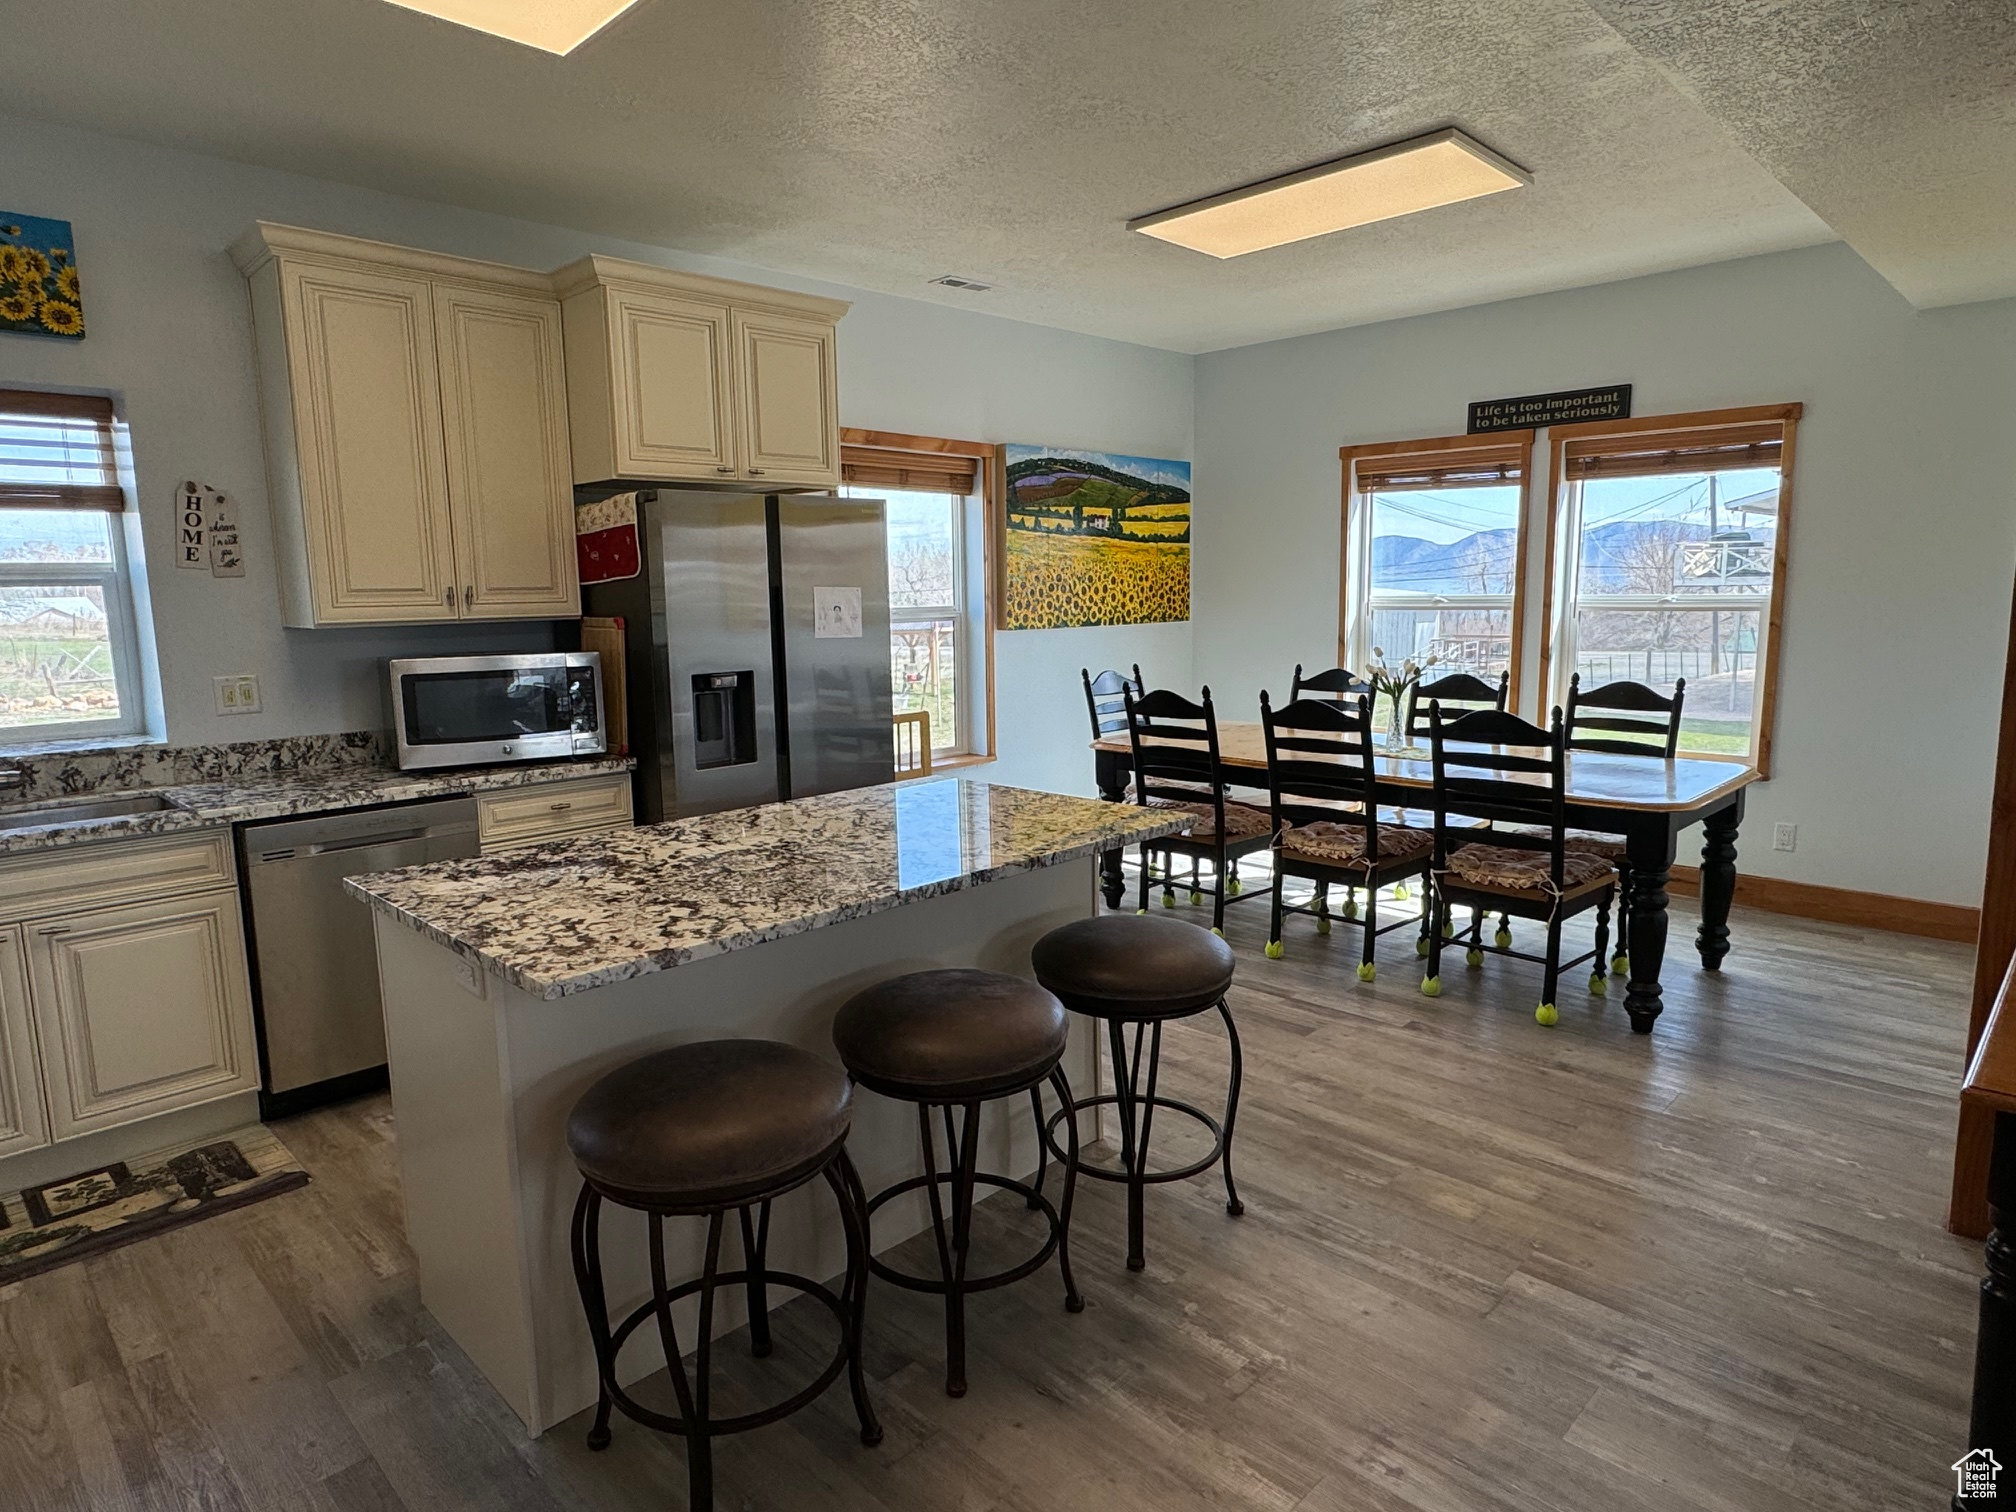 Kitchen with cream cabinets, a kitchen island,  stainless steel appliances, and LVP flooring